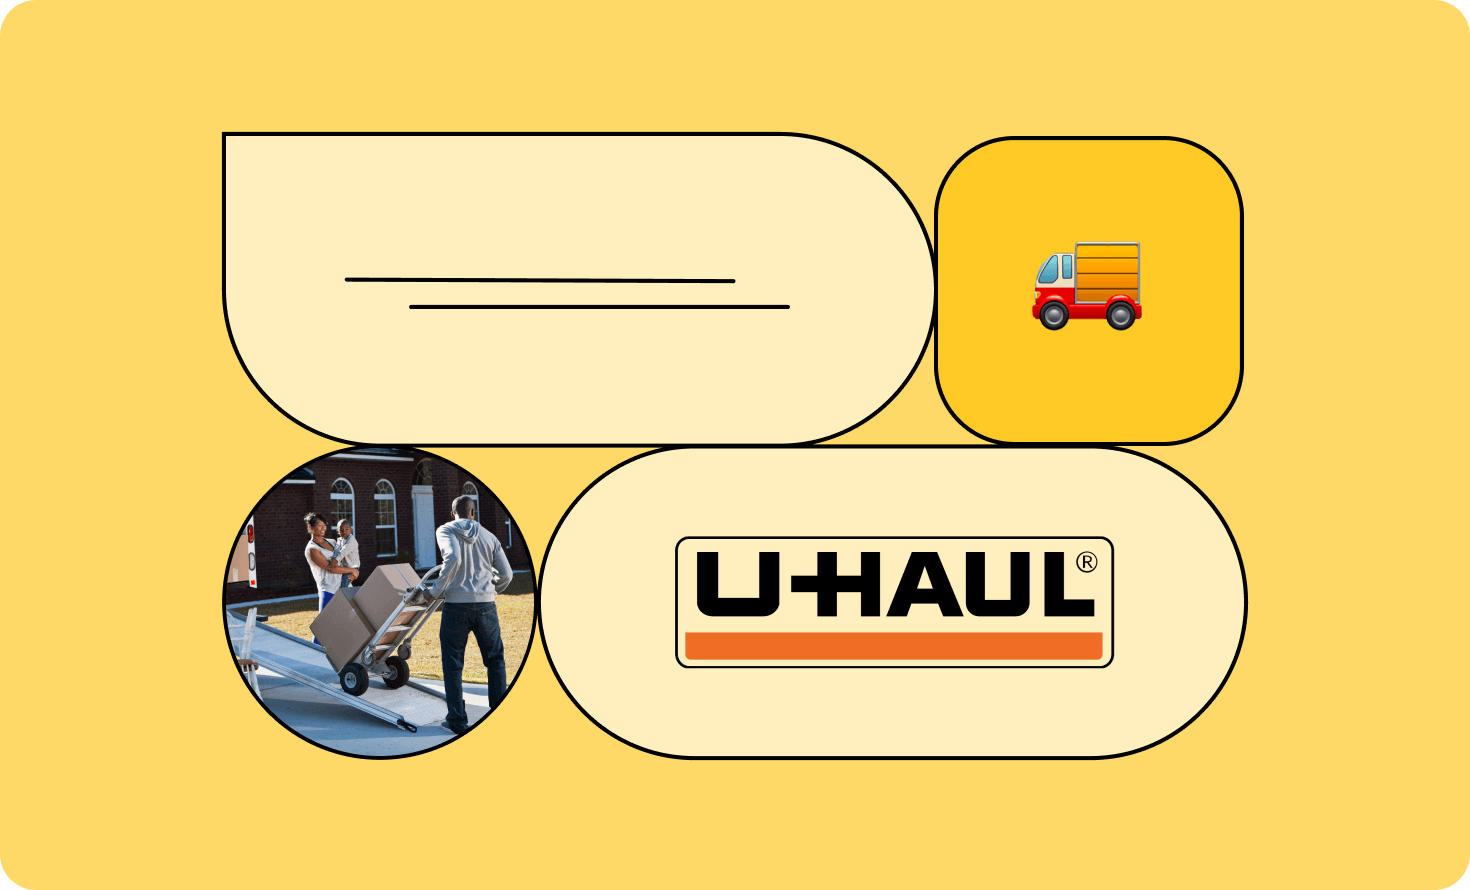 Illustration with person moving boxes, truck emoji, and U-HAUL logo